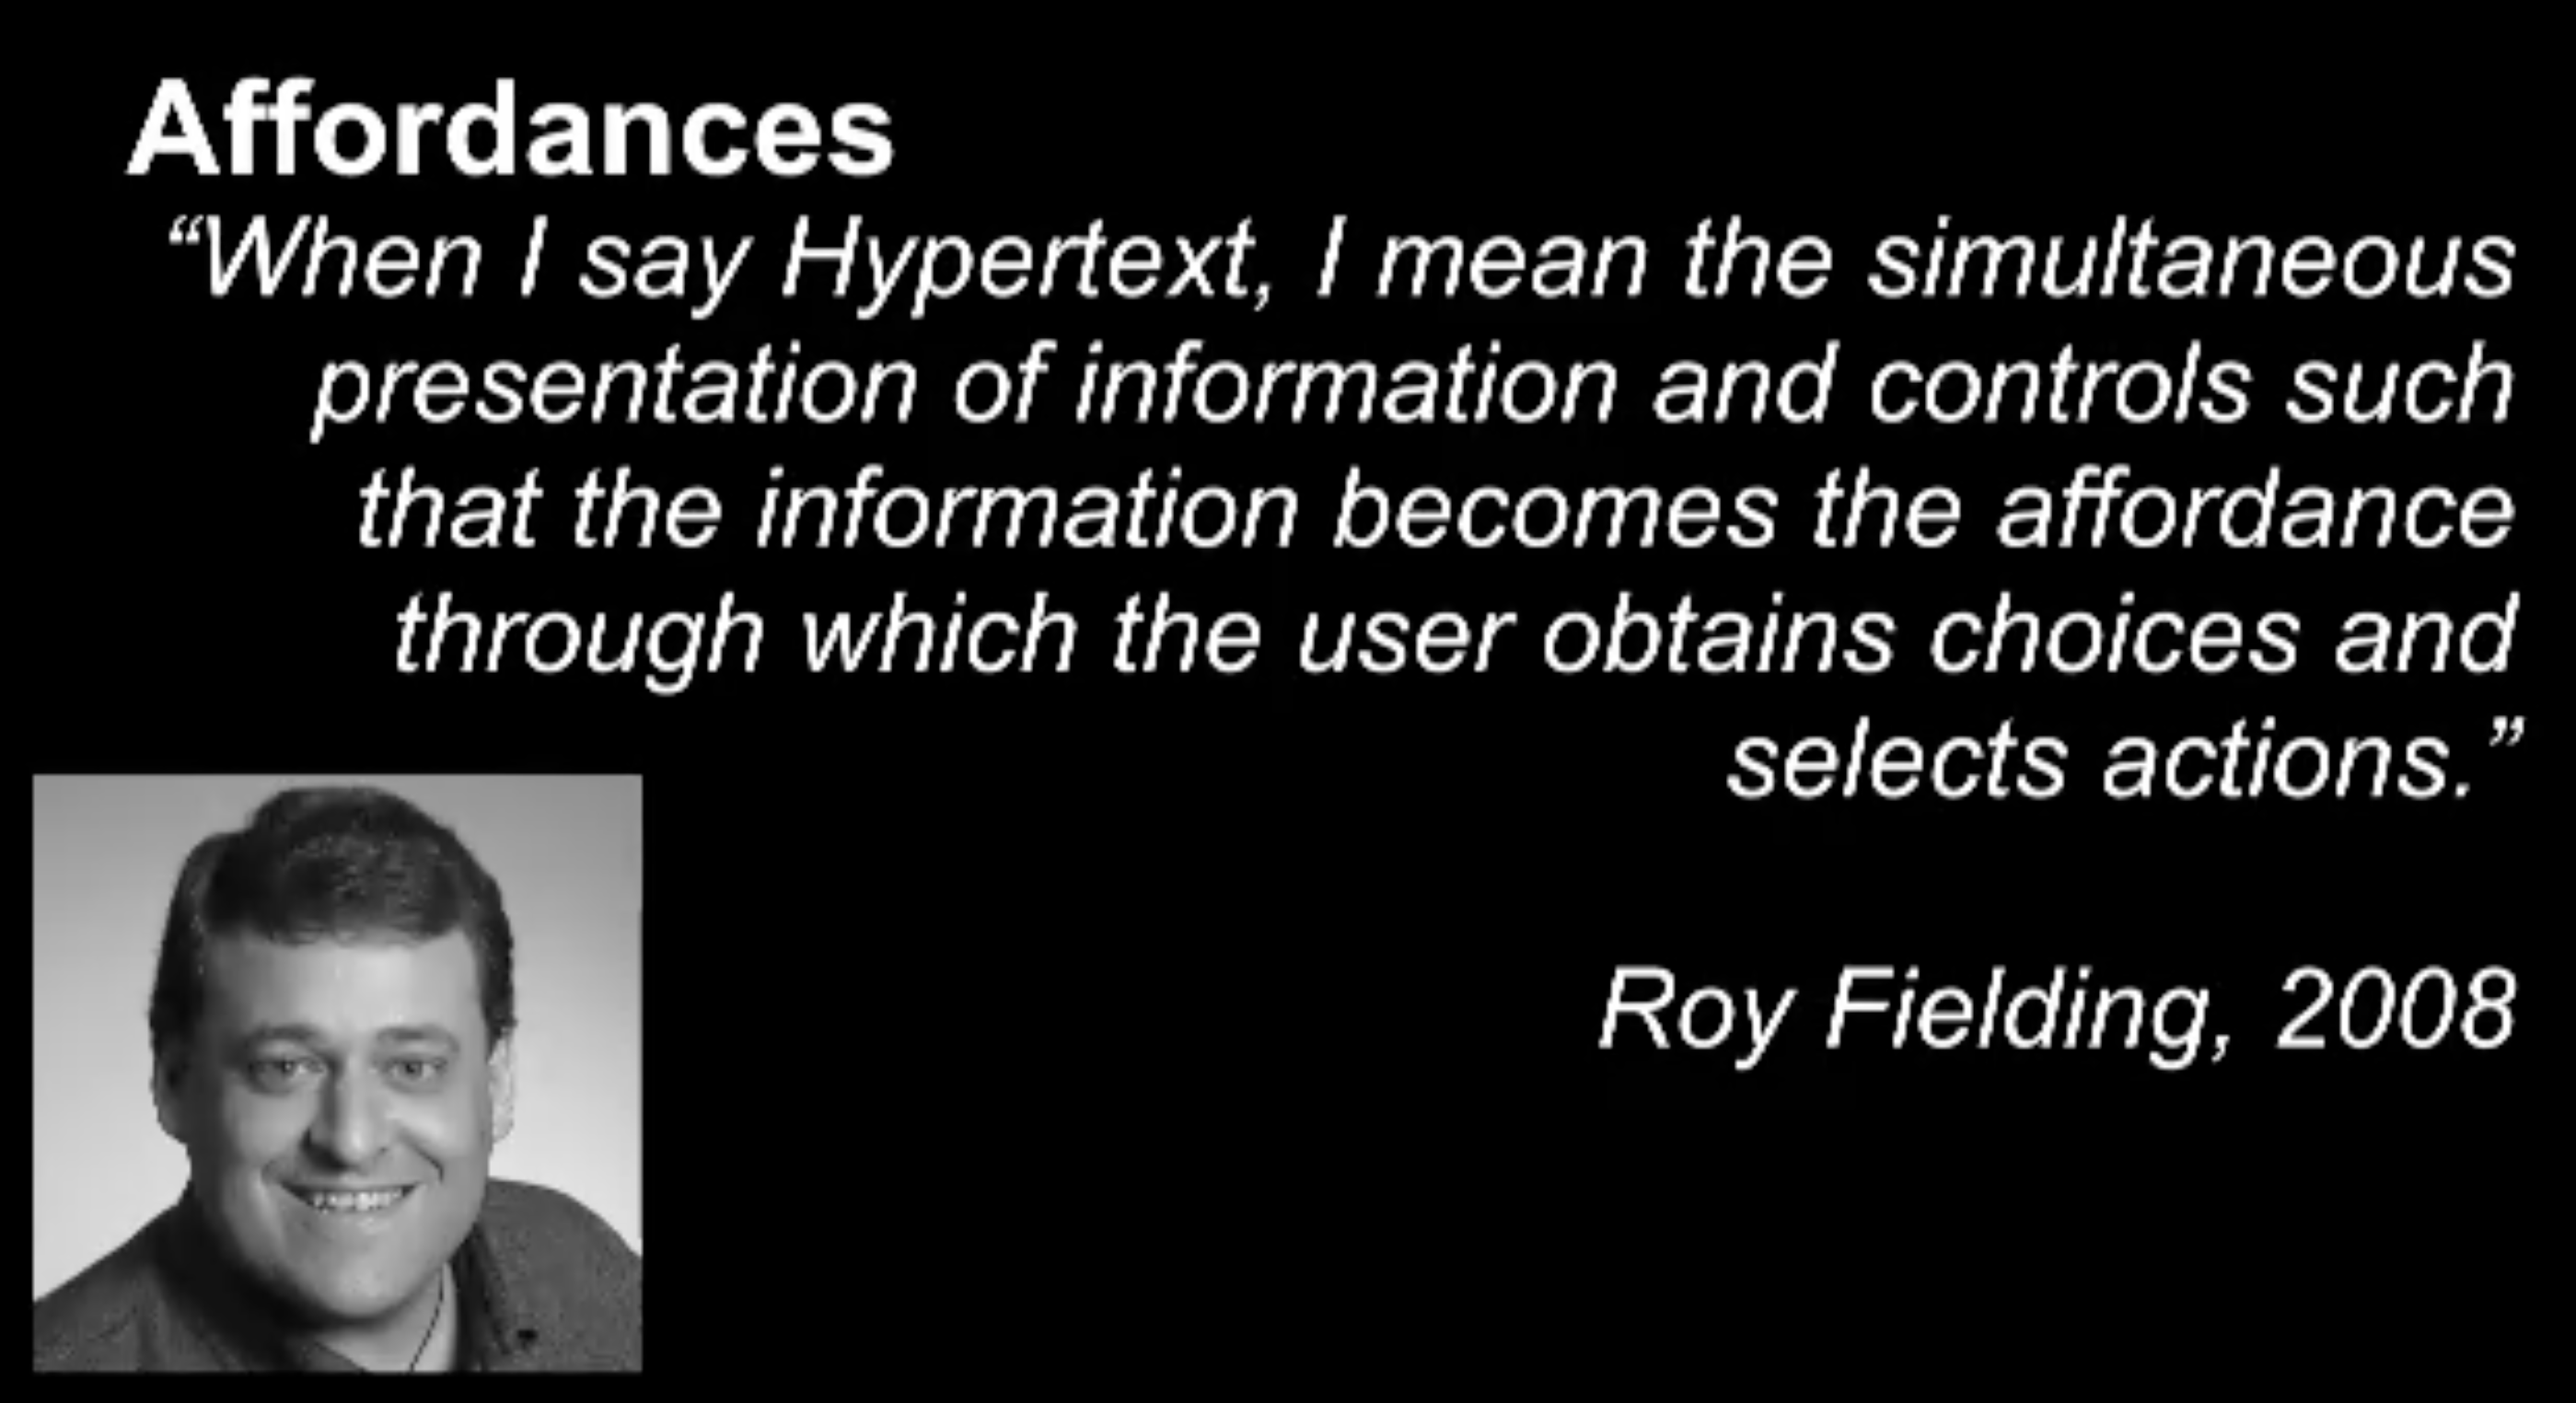 When I say hypertext, I mean the simultaneous presentation of information and controls such as that the information becomes the affordance through which the user obtains choices and selects actions. by Roy Fielding, 2008